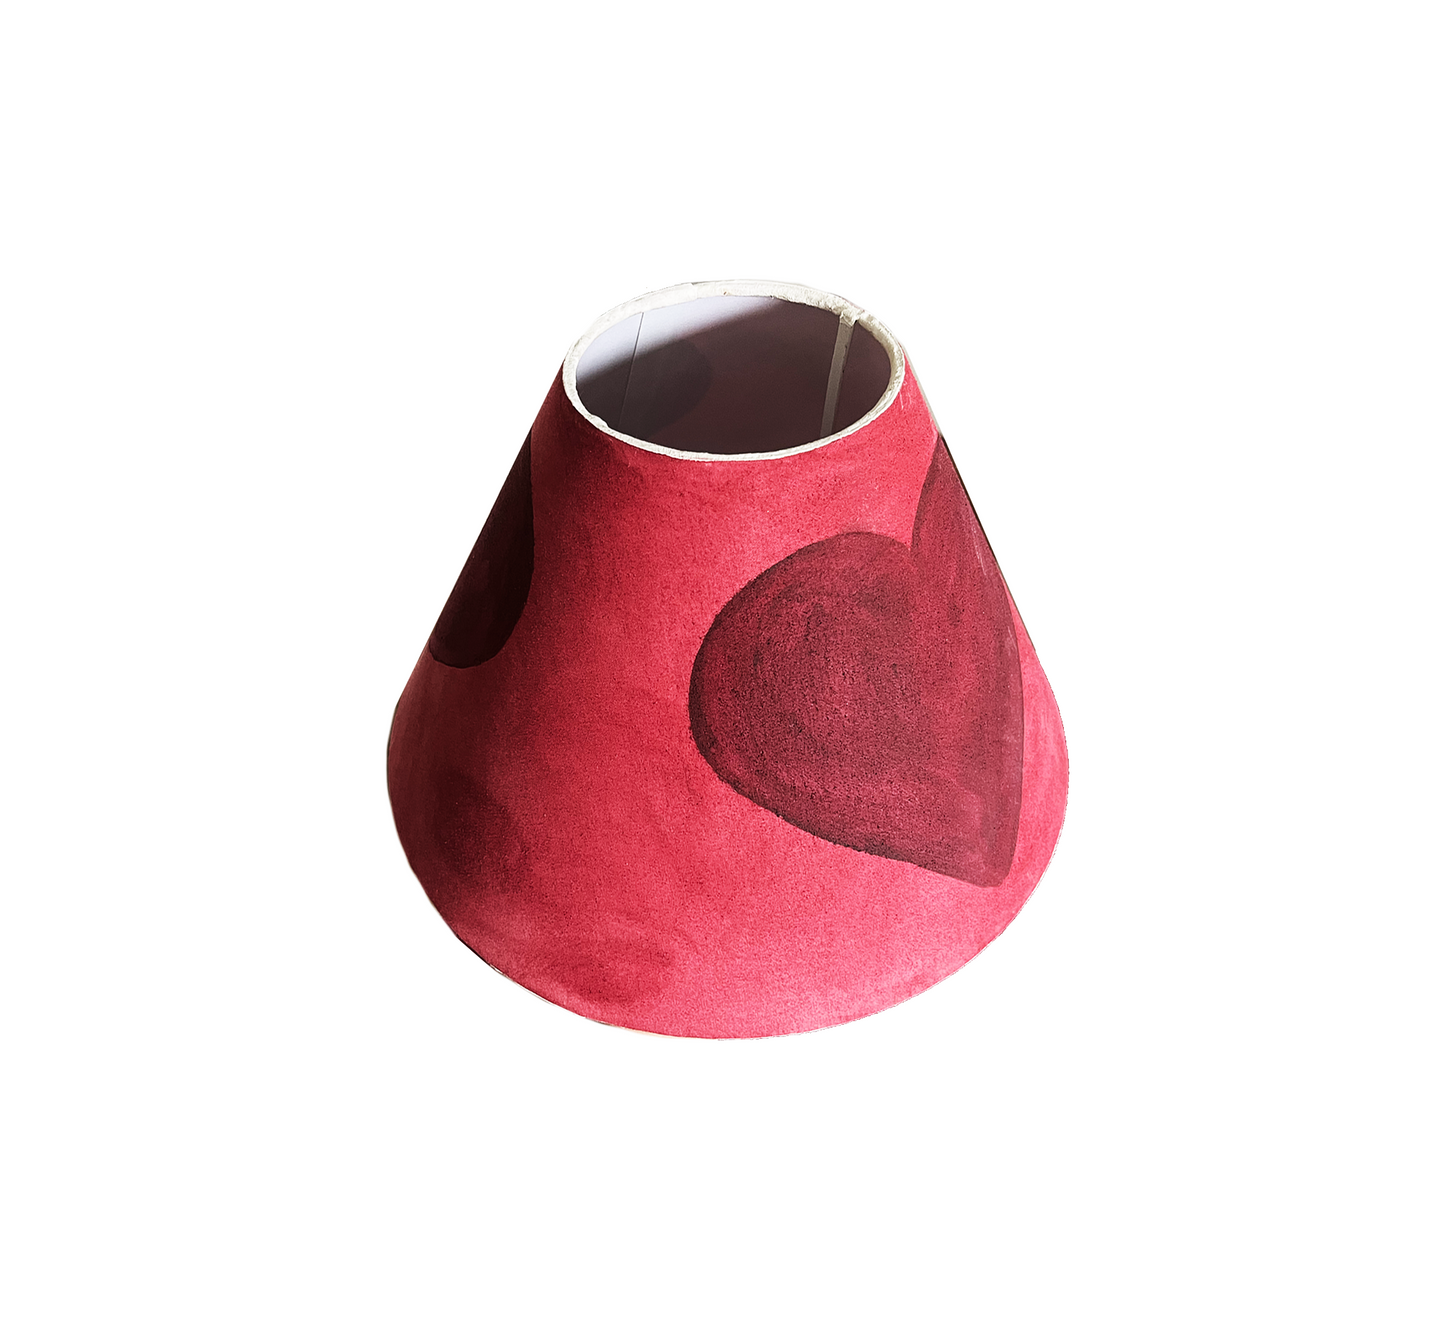 A Red Love Heart Hand Painted Lampshade